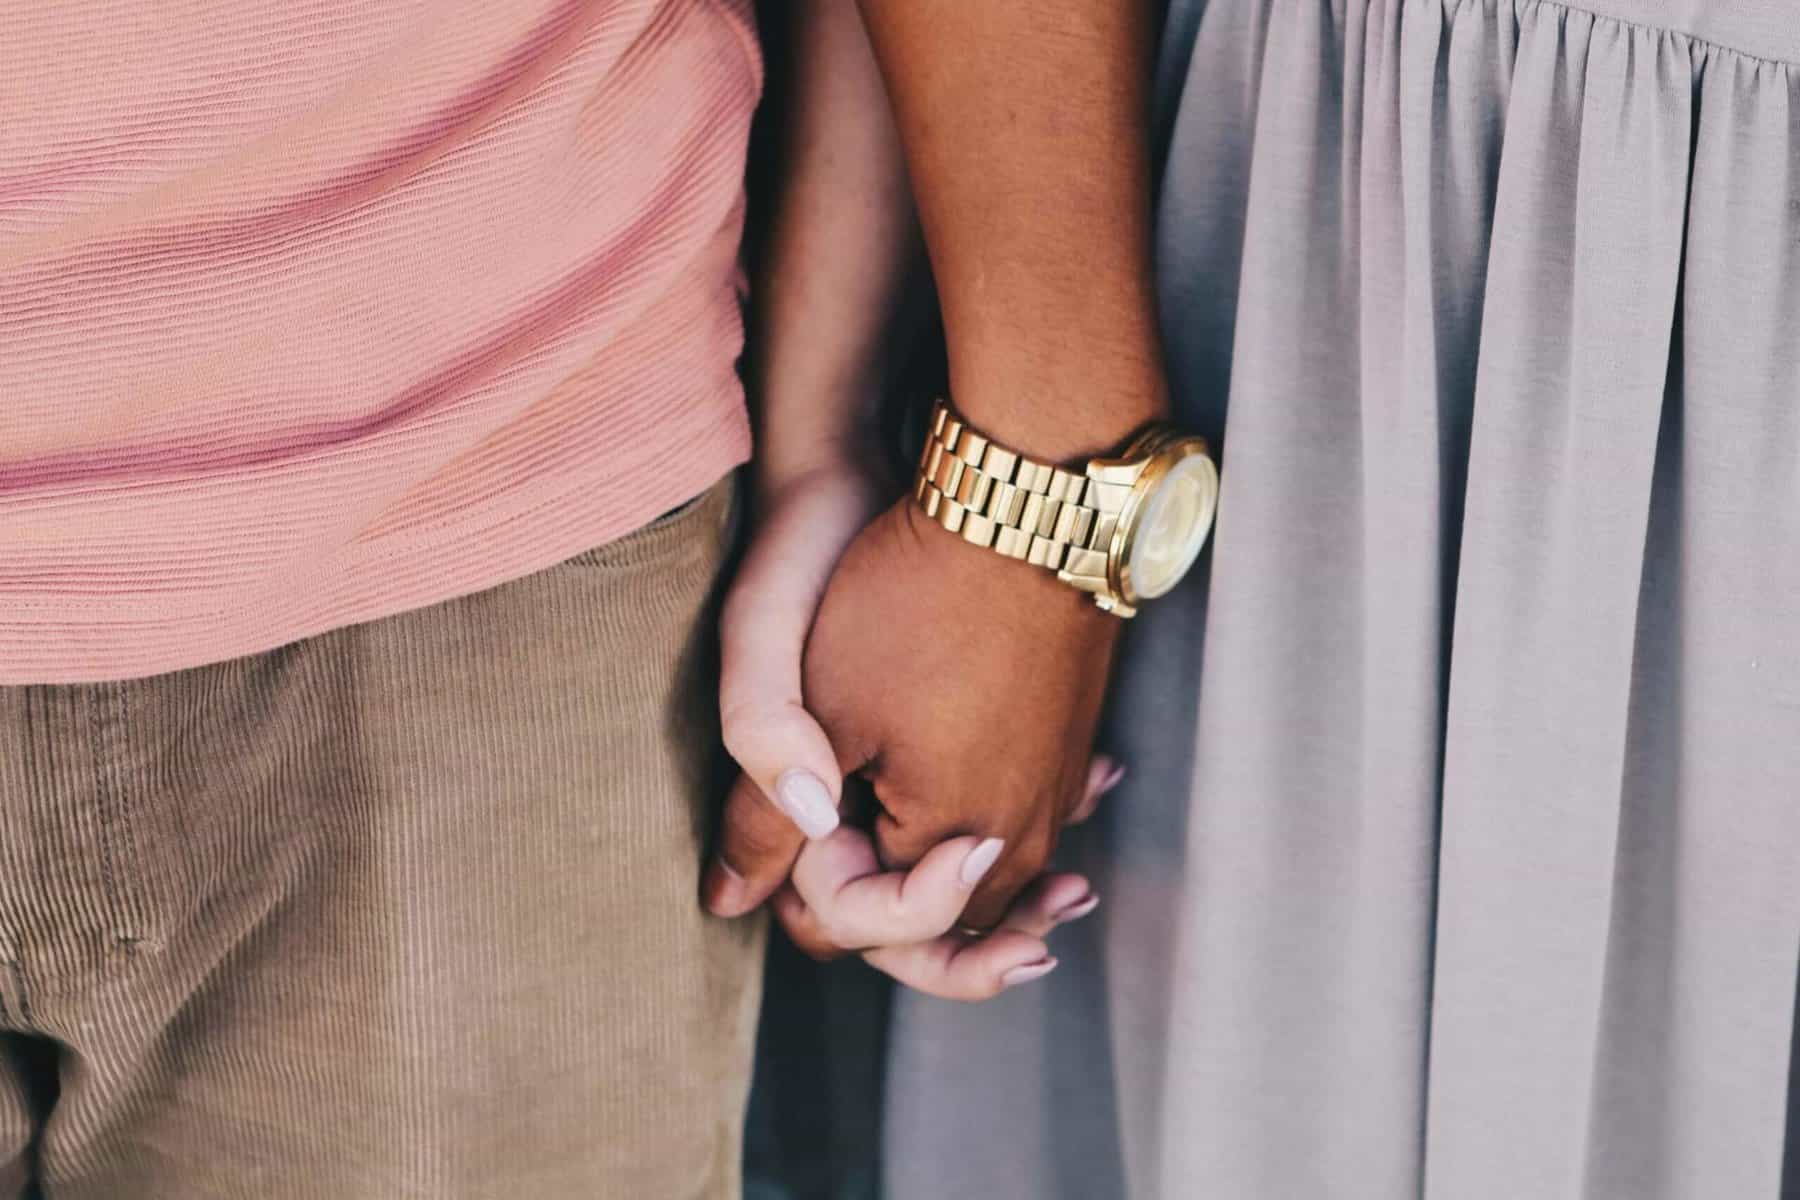 Picture of Black male hand holding the hand of a white female